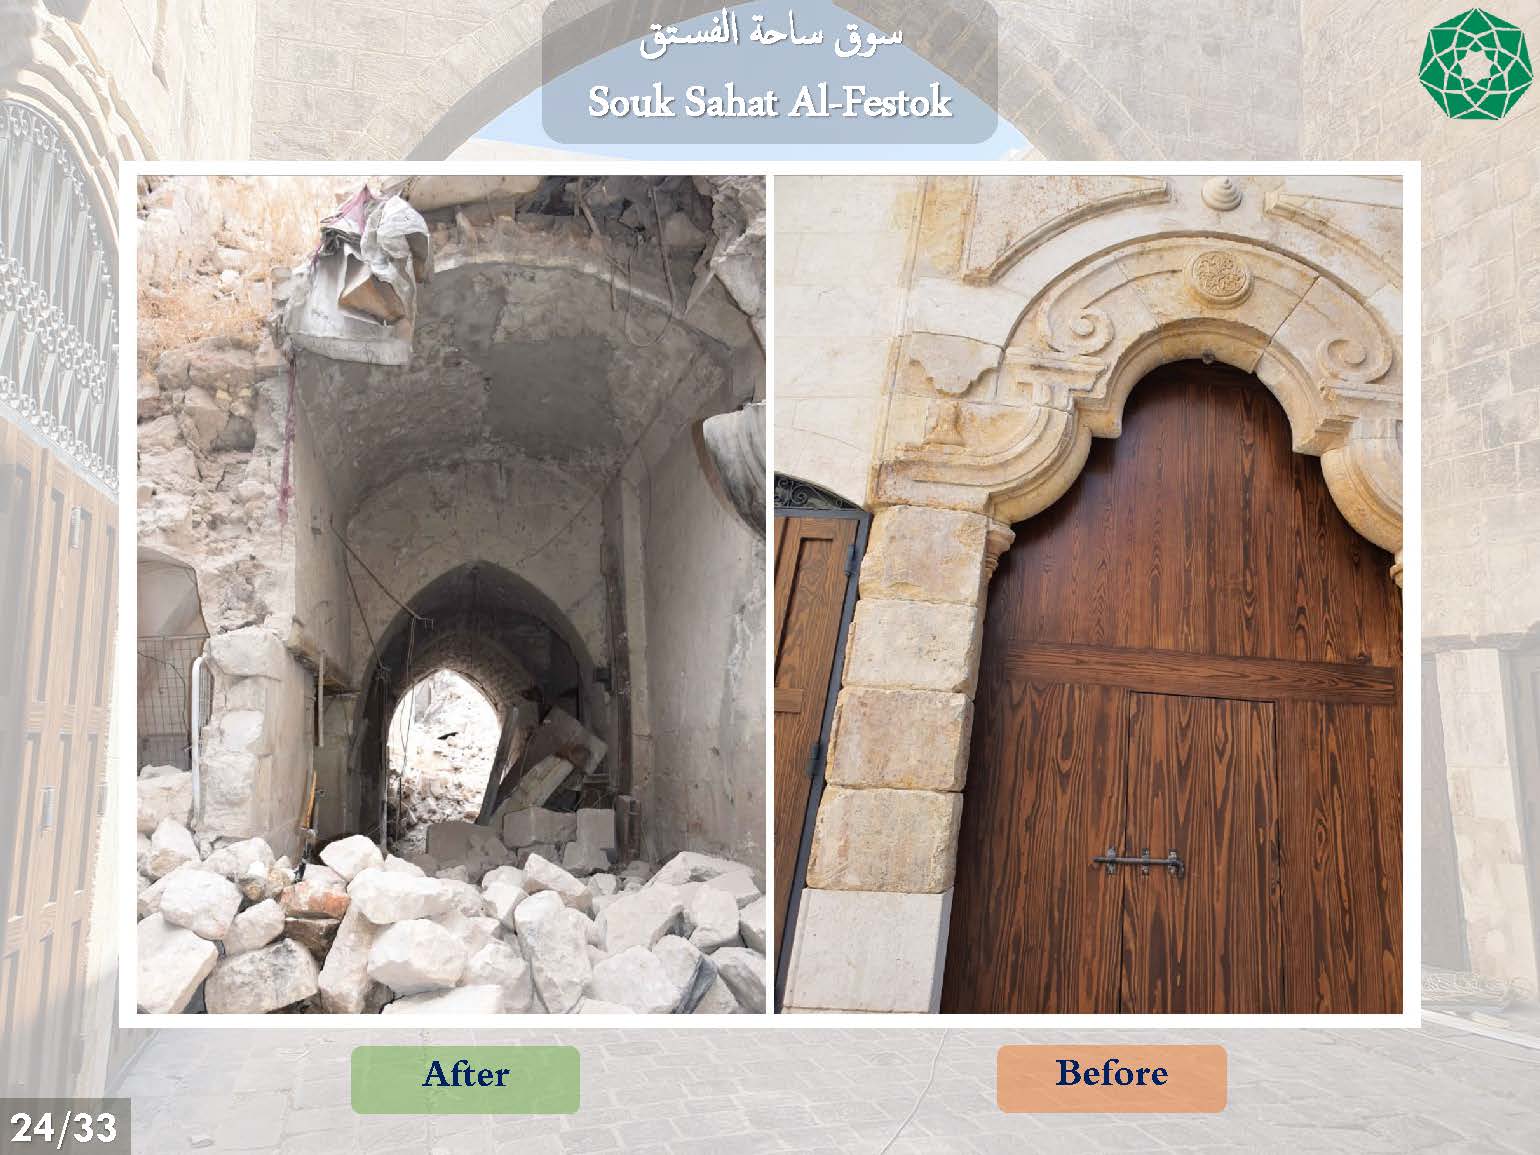 <p>Before and after images showing the extent of the rehabilitation effort (entrance gate)</p>